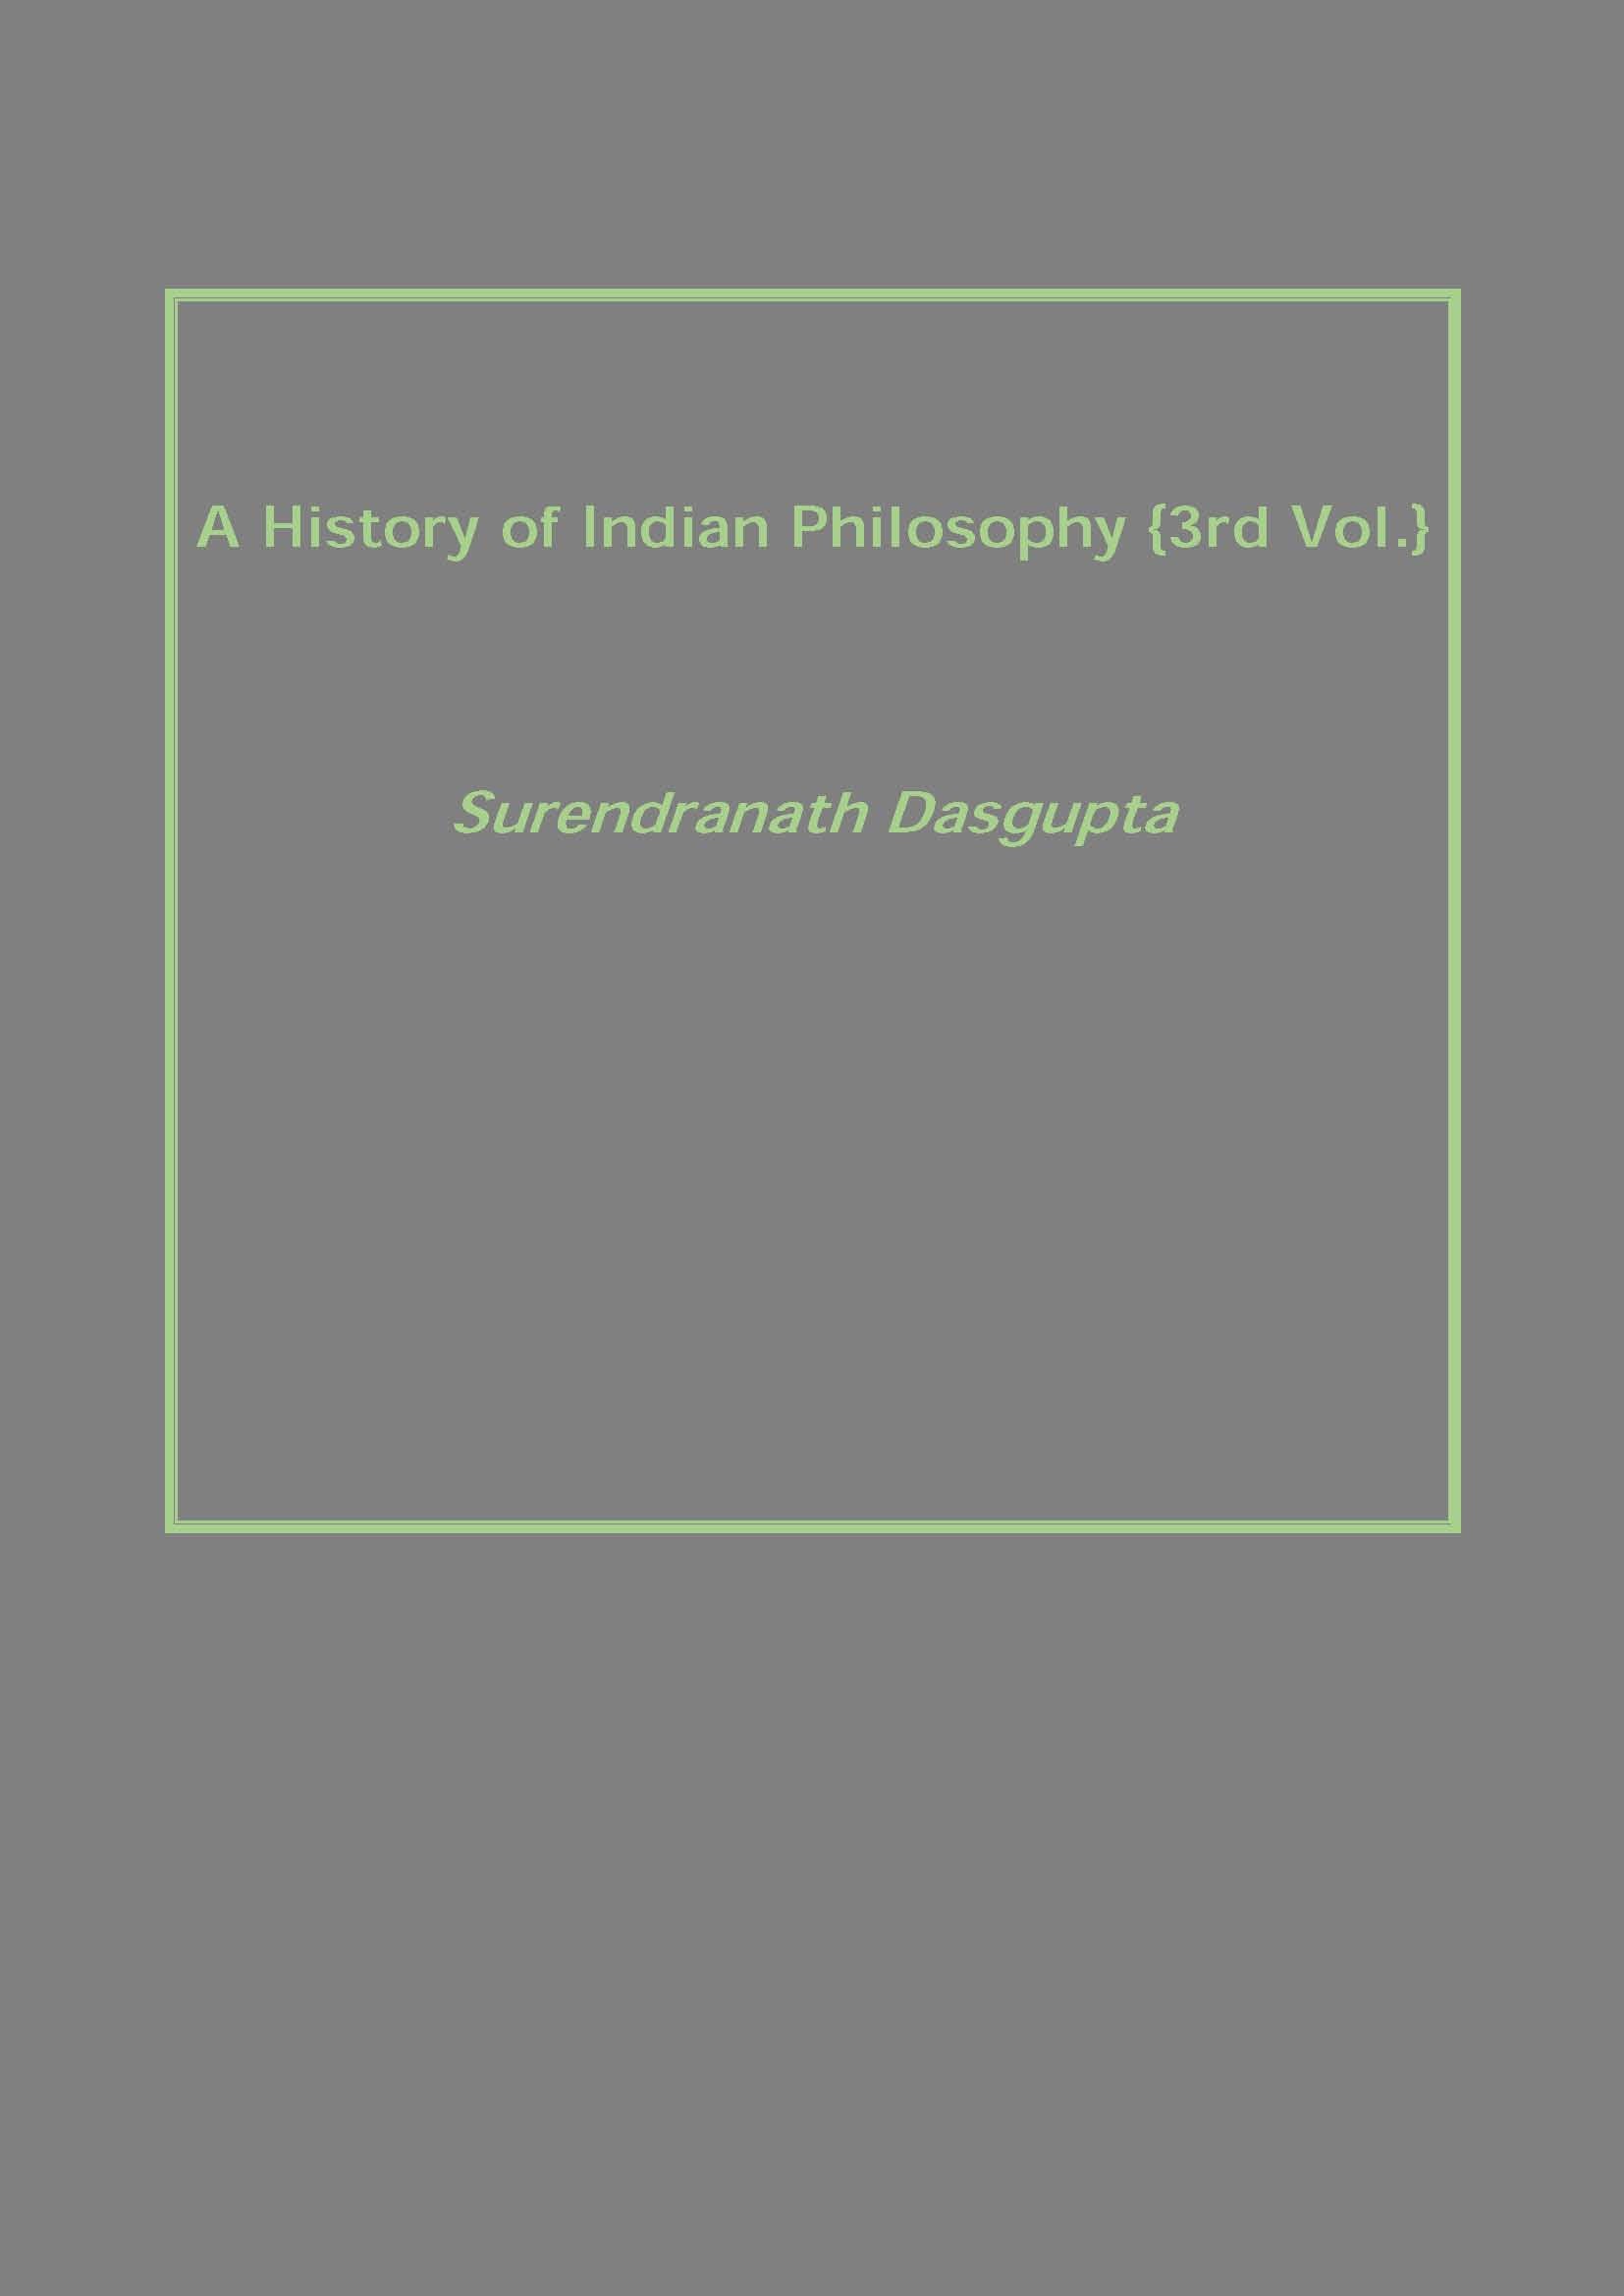 A History of Indian Philosophy Volume Vol. 3rd